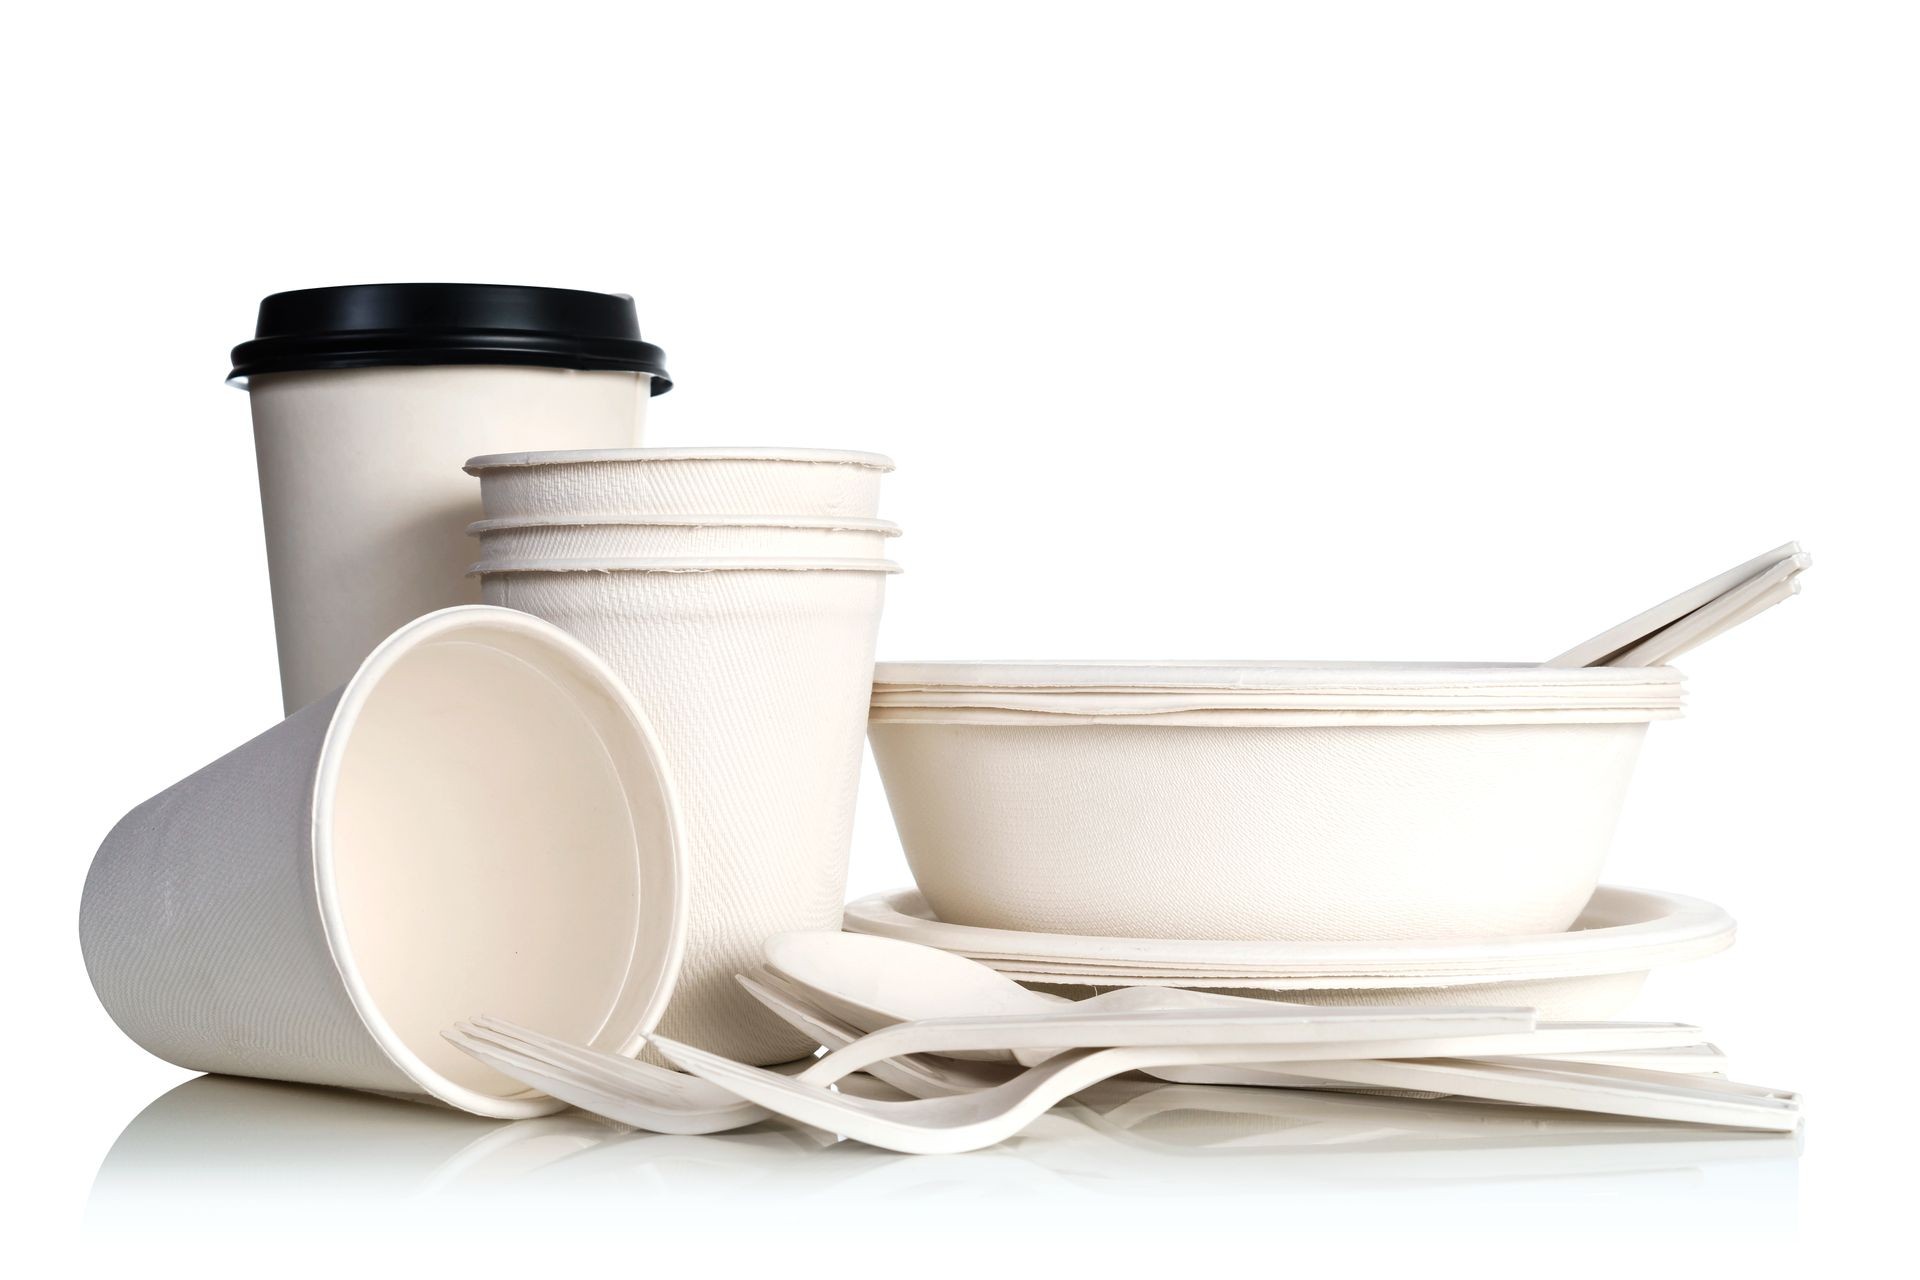 PLA cutlery, containers, straws and lids - Sugarcane bagasse products - compostable bags - Sustainable food packaging solutions